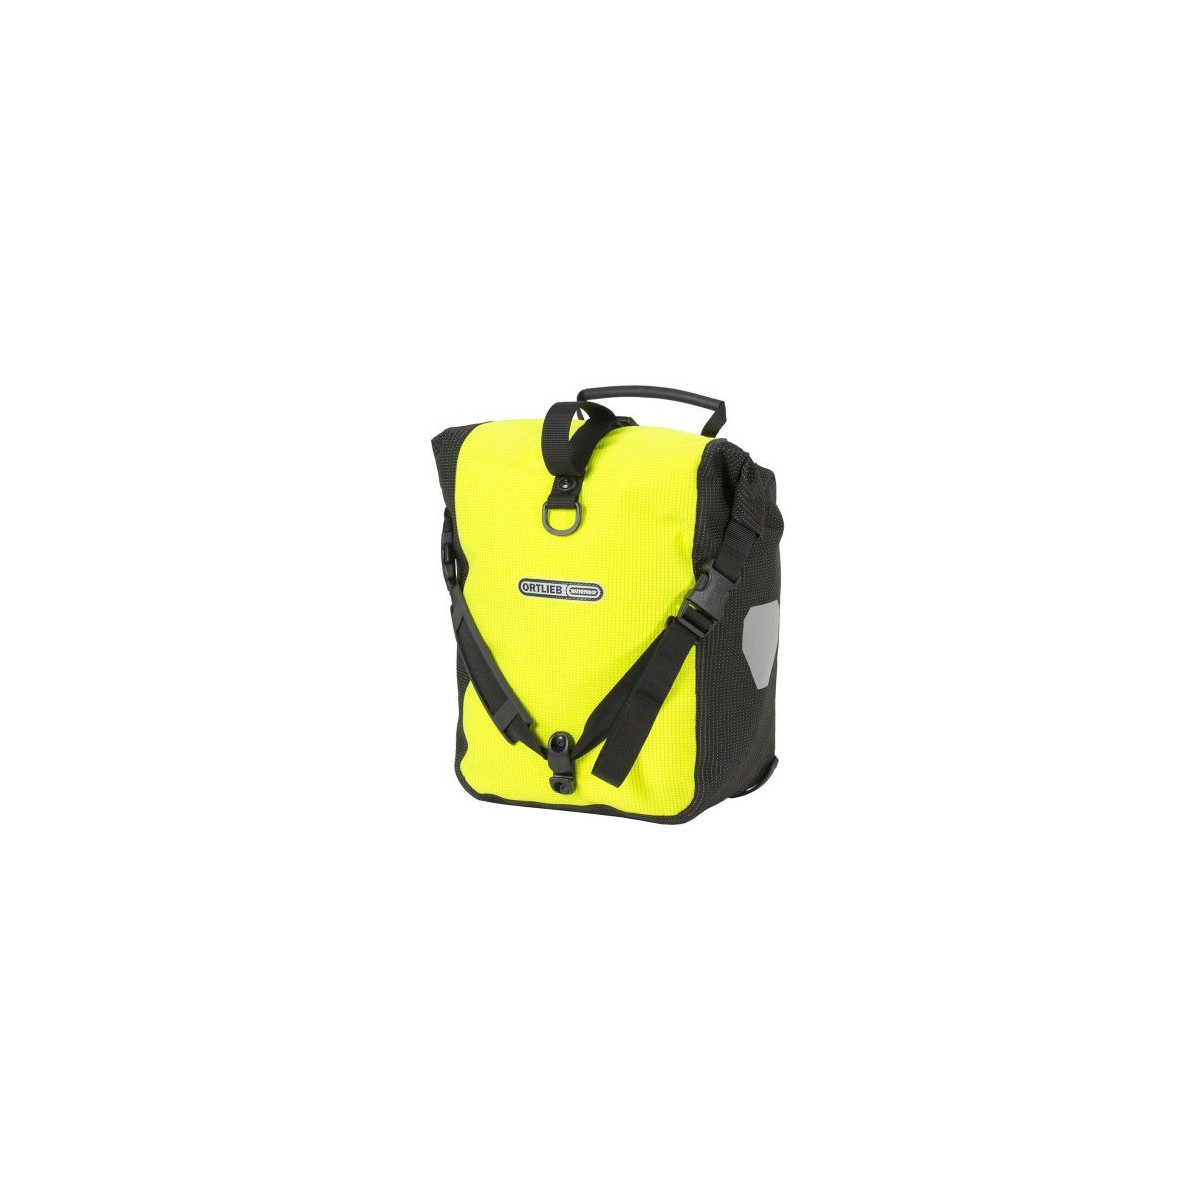 Velosomas Ortlieb Front-Roller High Visibility